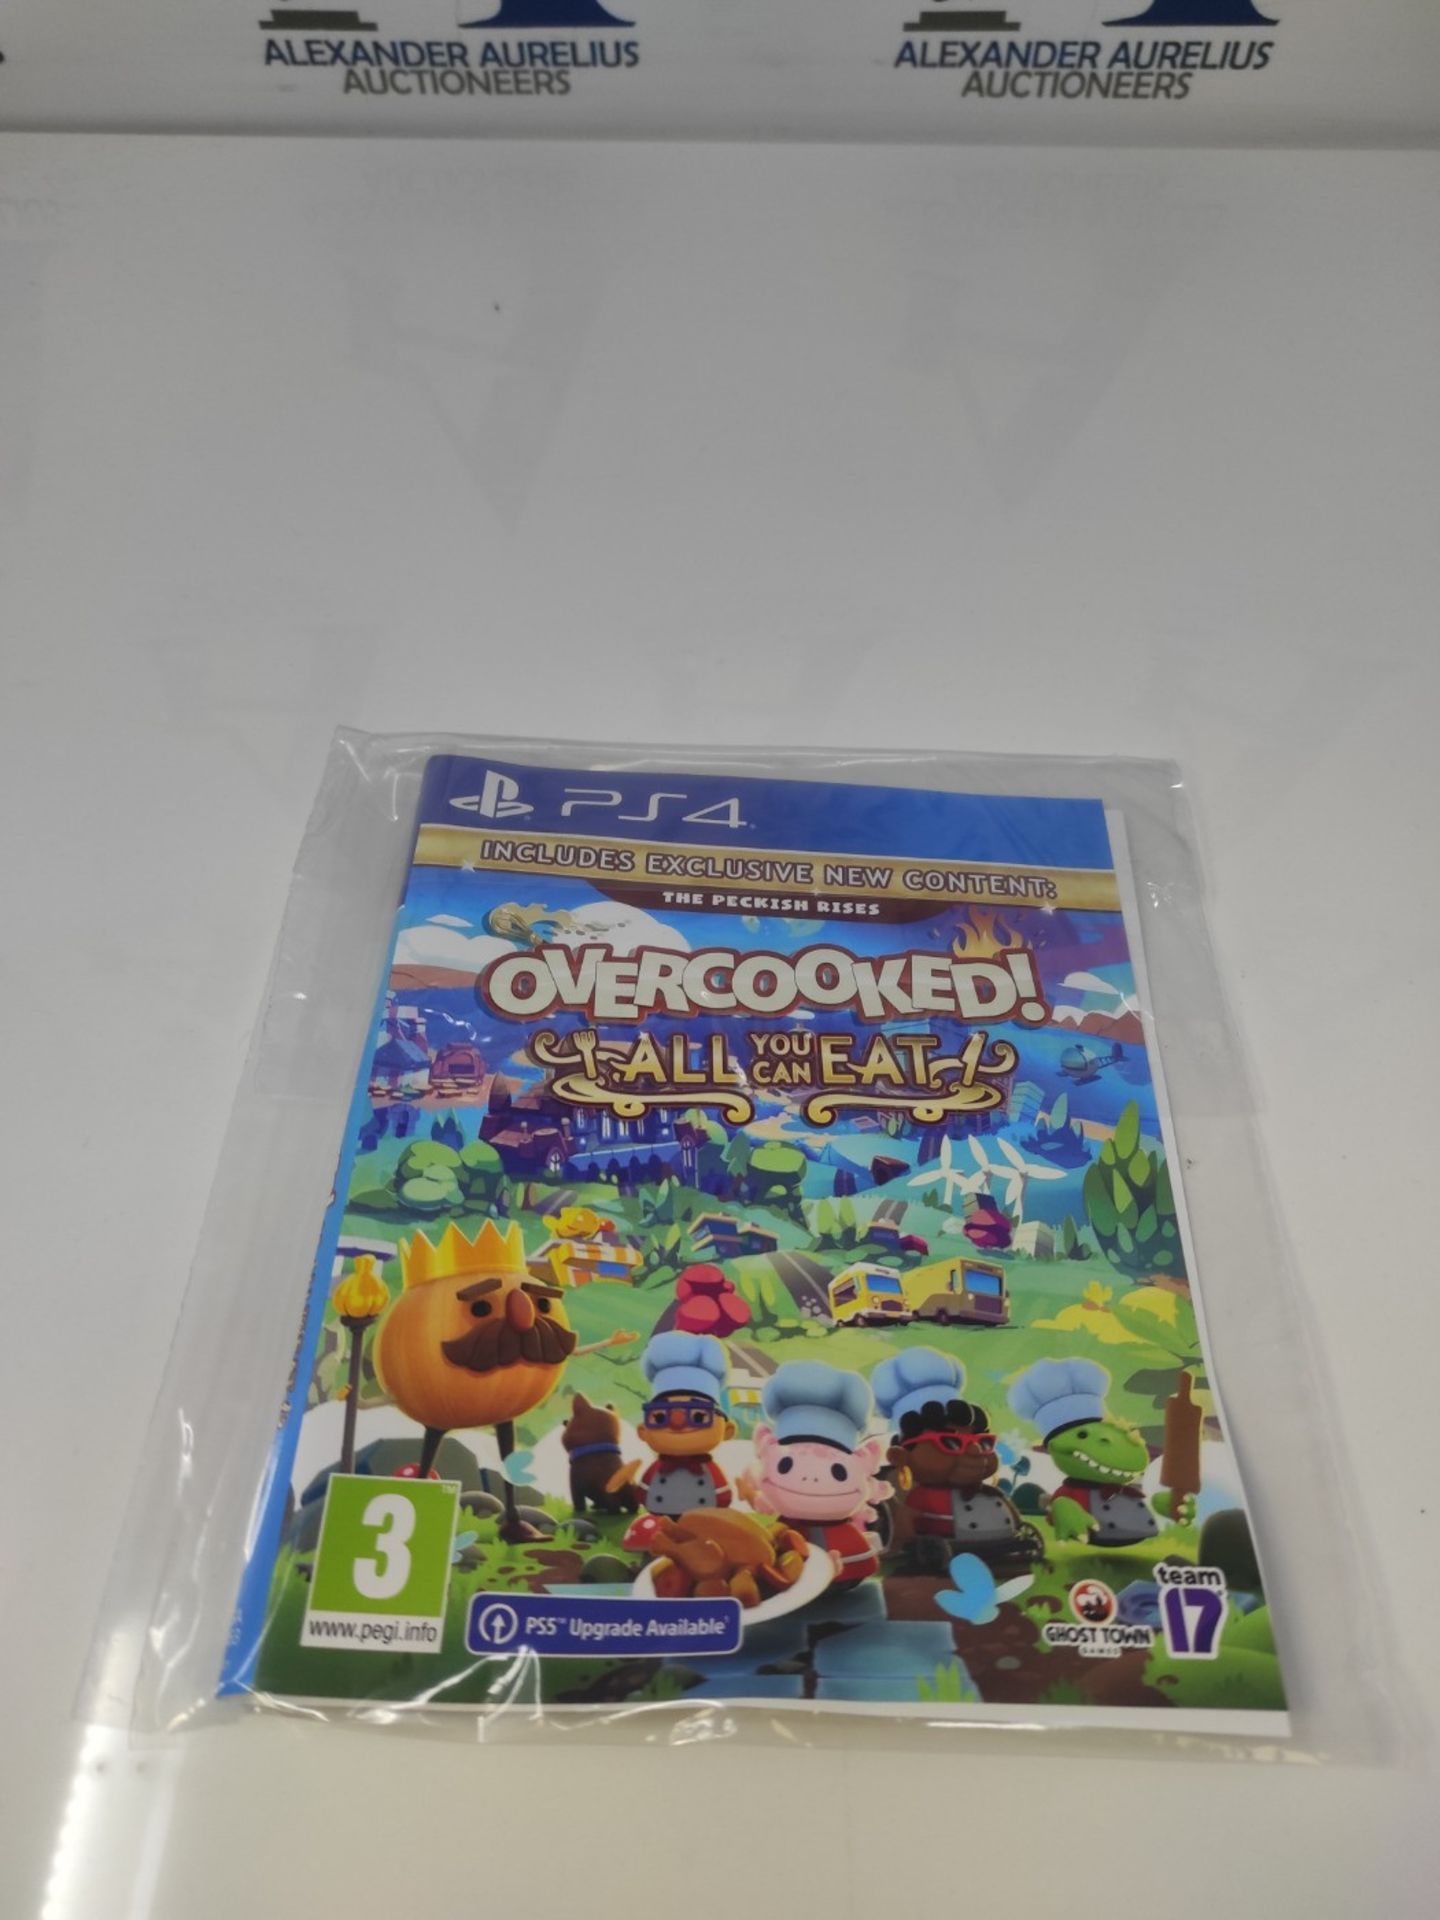 PS4 Overcooked: All You Can Eat - PlayStation 4 - Image 2 of 6